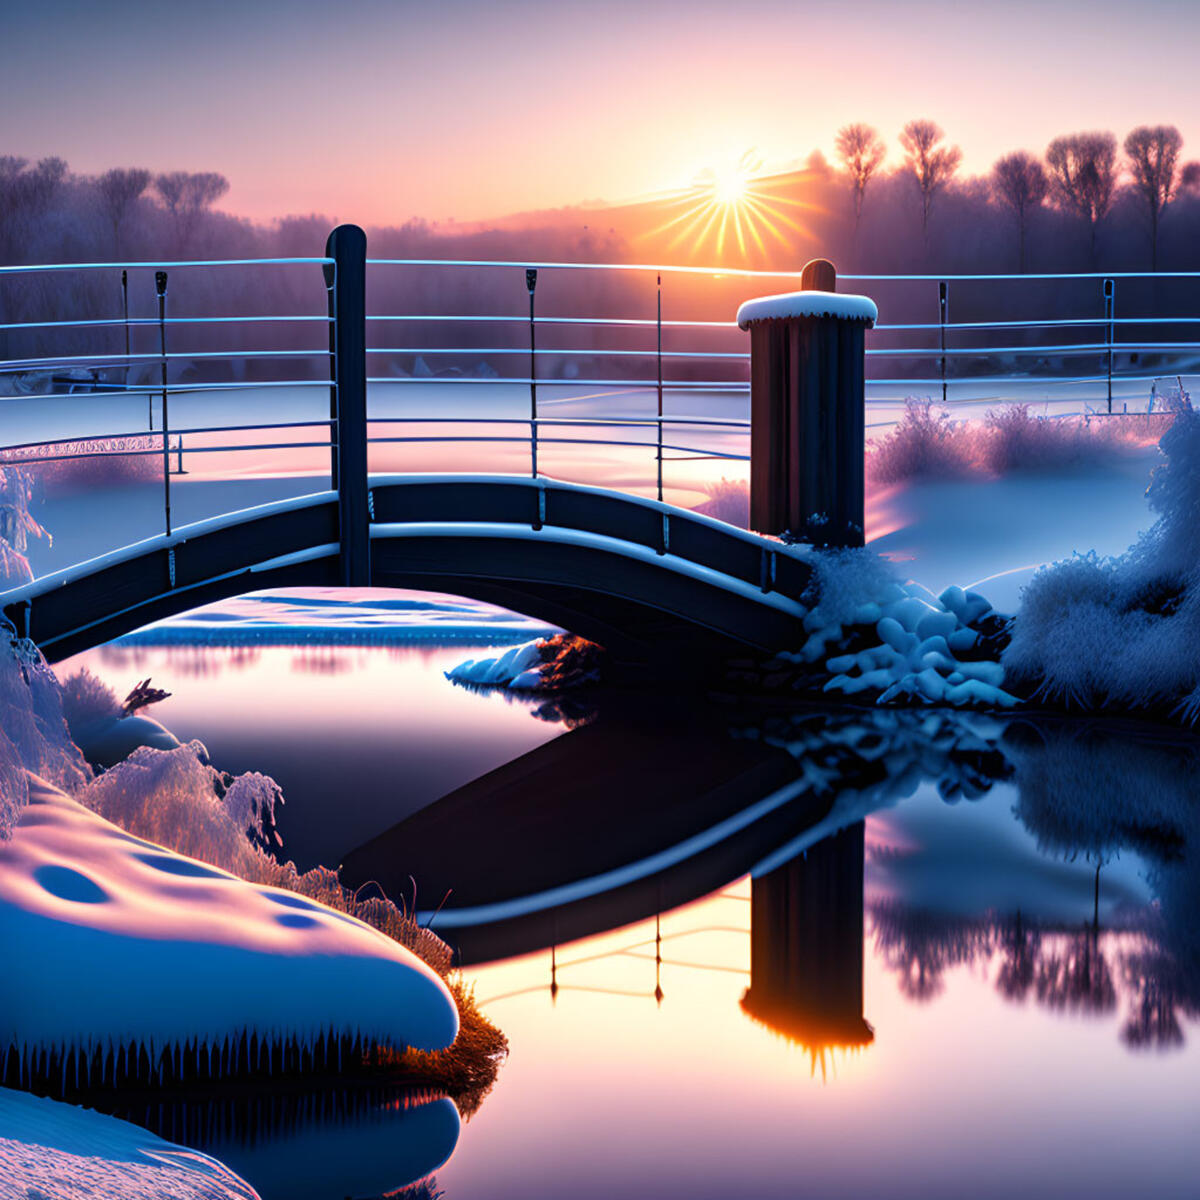 Fantastic sunrise over the river with the bridge on a frosty winter snowy morning